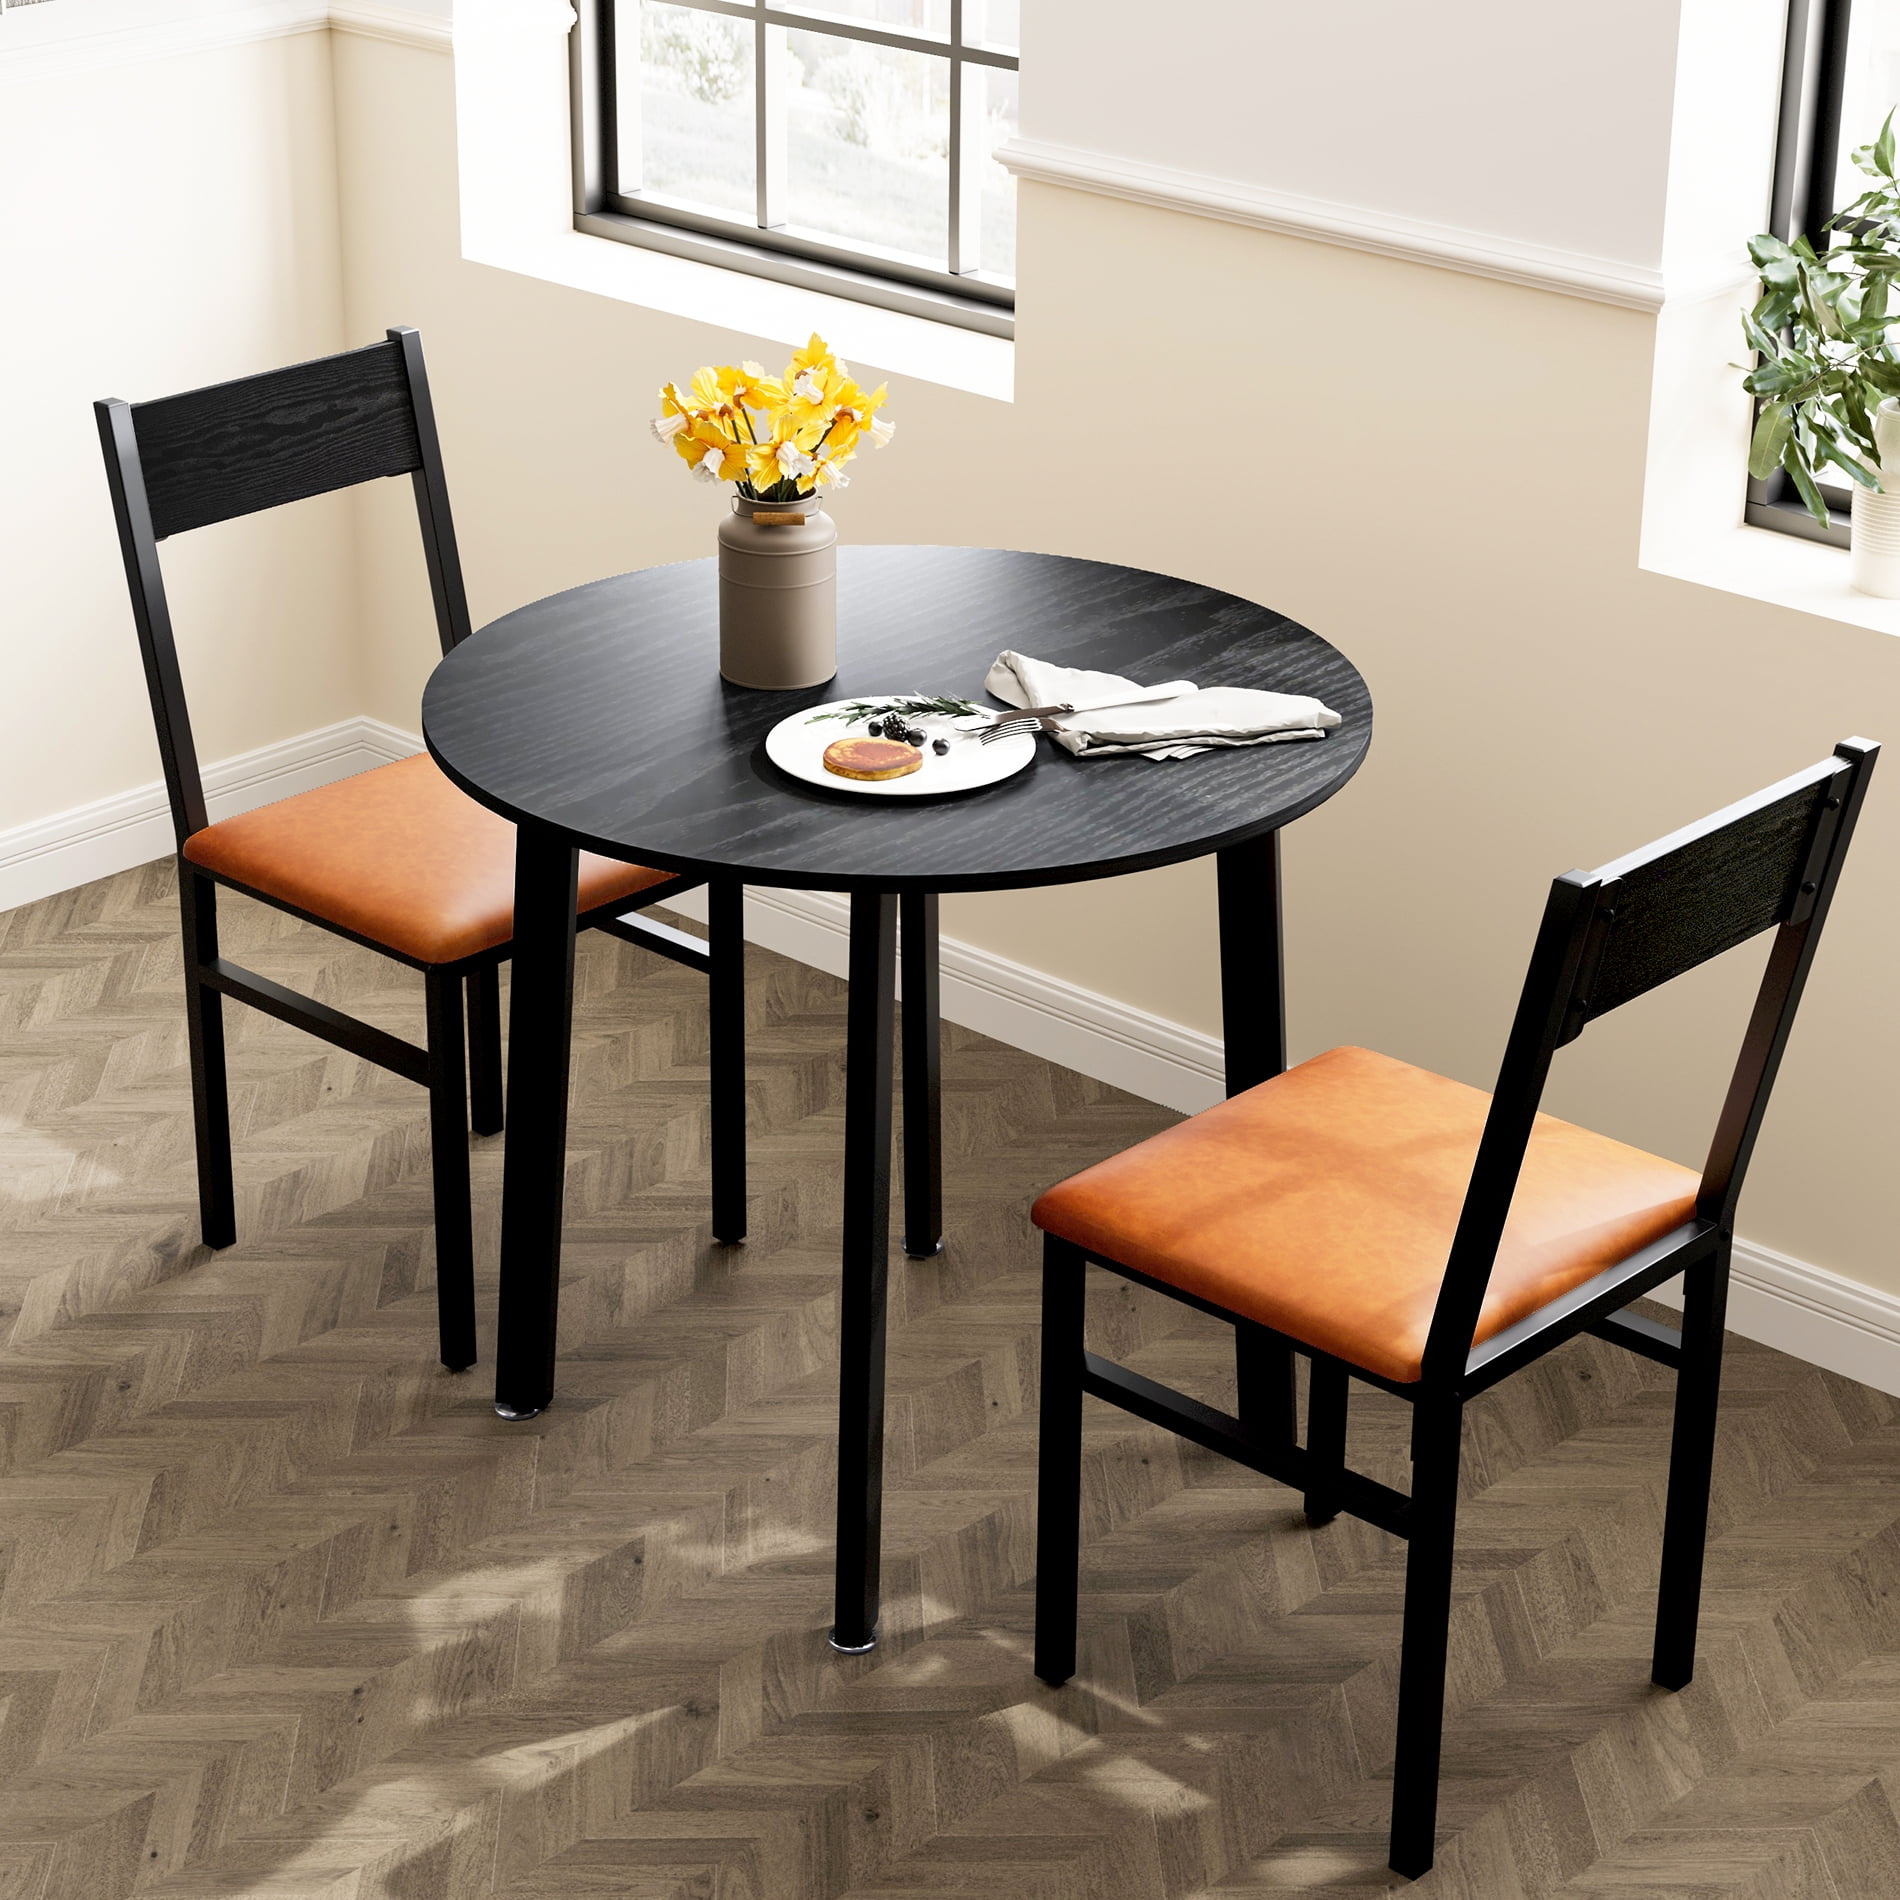 Homury 3 Piece Dining Table Set With